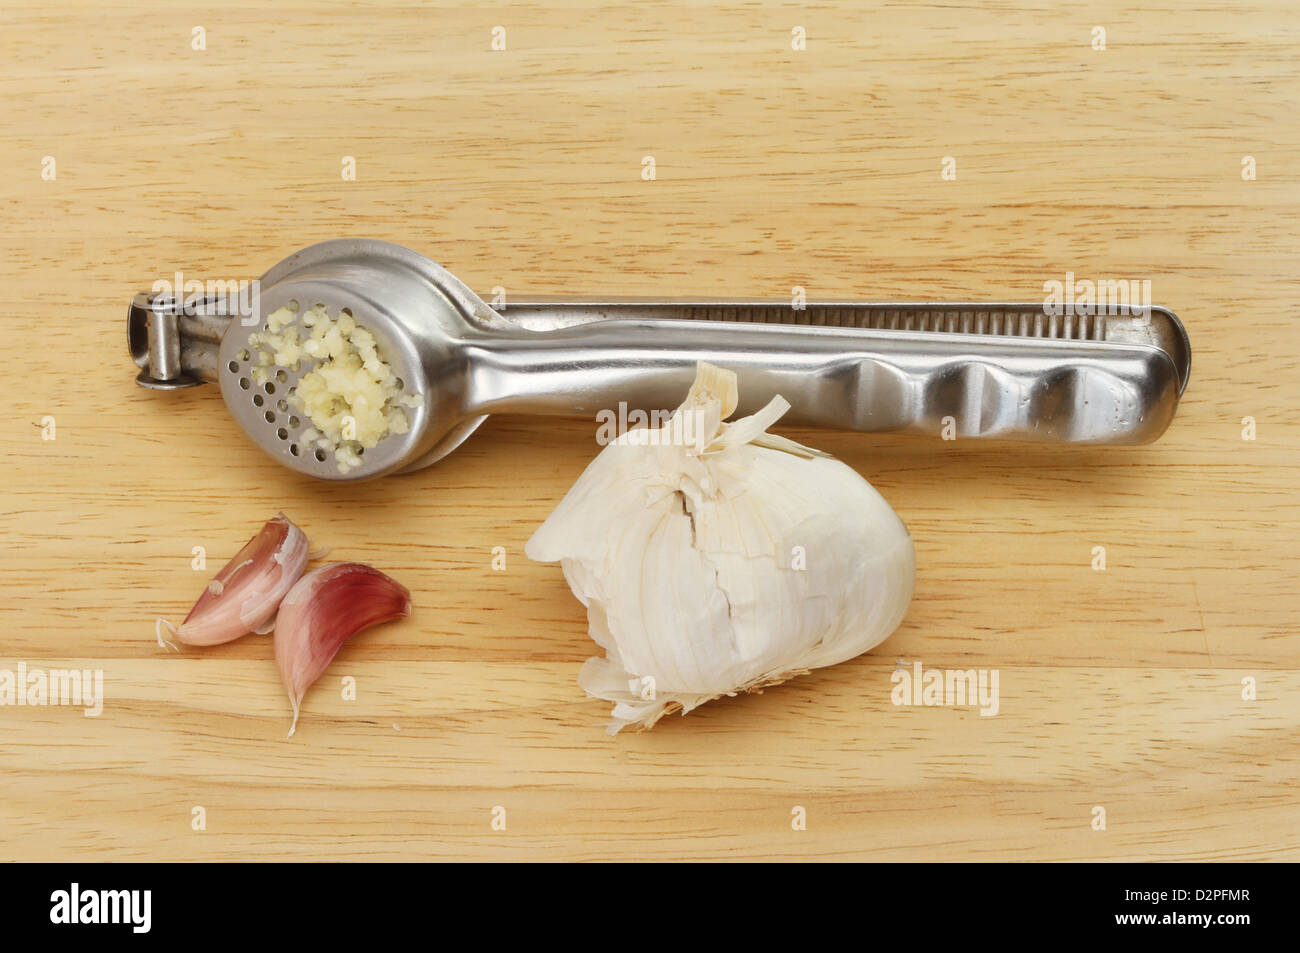 Garlic press with a garlic bulb and cloves on a wooden board Stock Photo